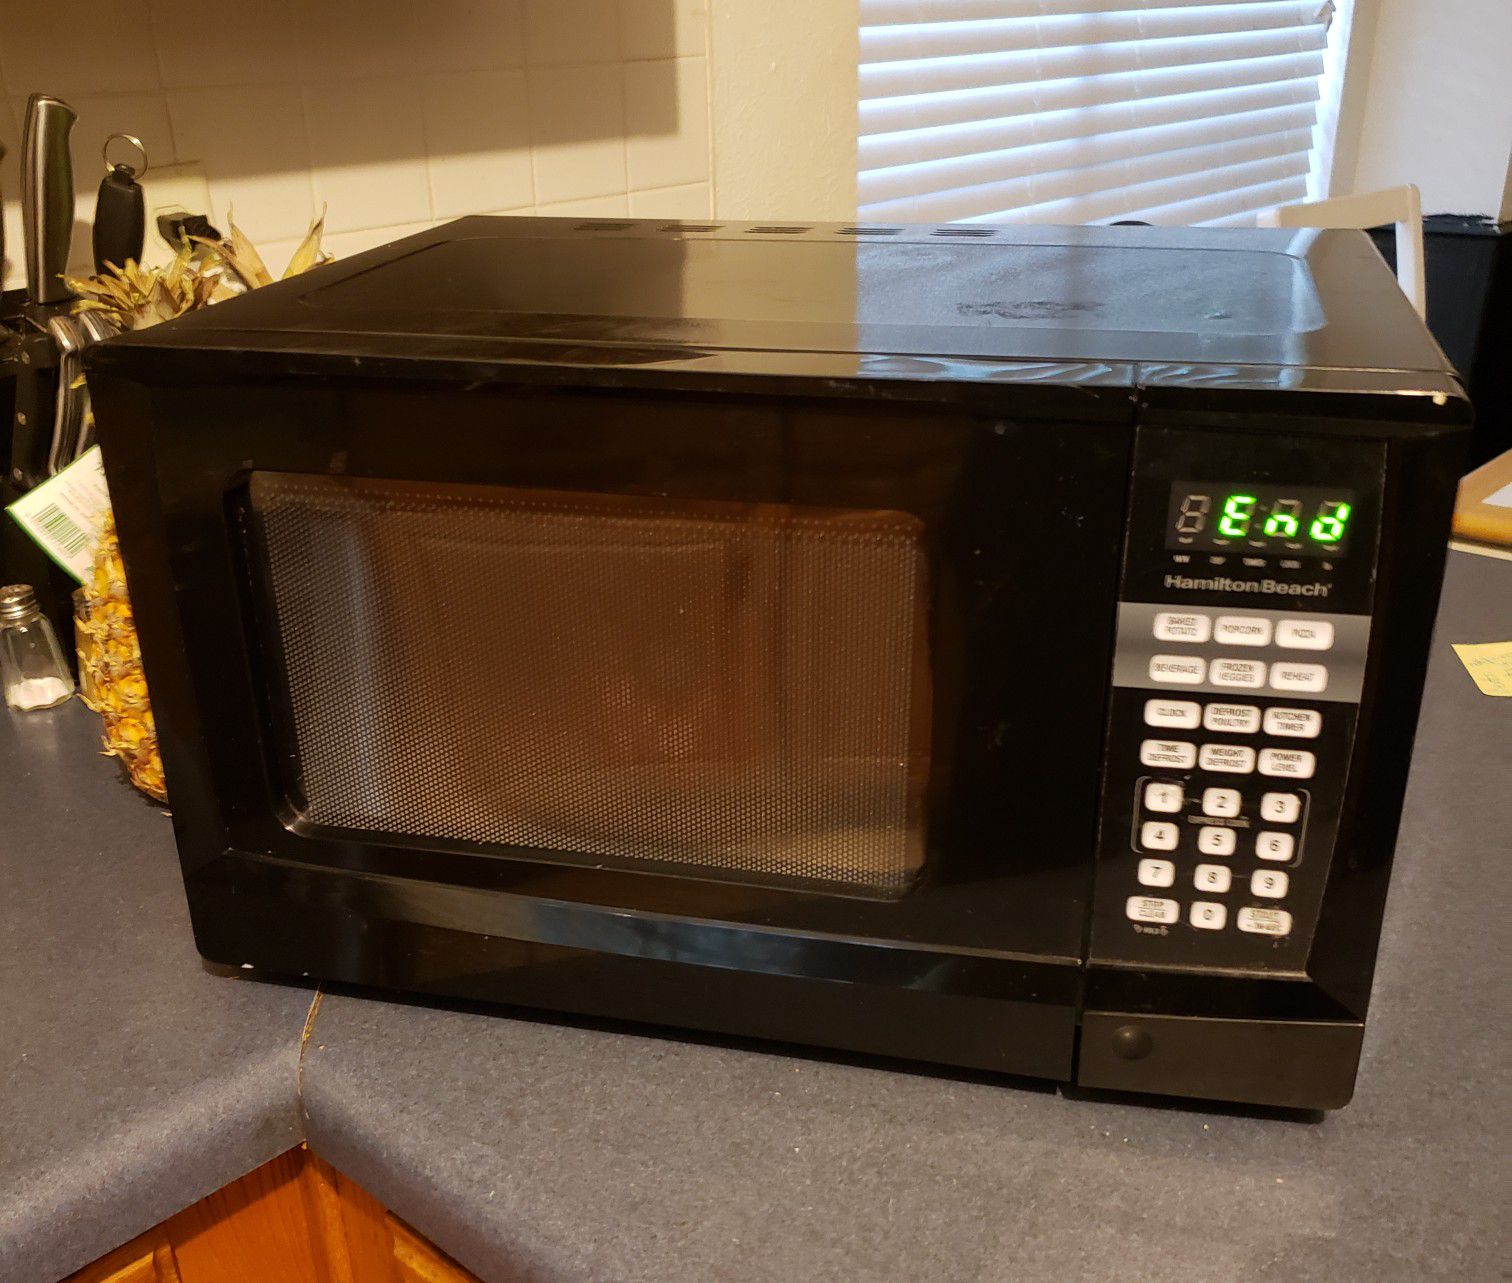 BLACK+DECKER 0.9 cu ft 900W Microwave Oven - Stainless Steel for Sale in  San Antonio, TX - OfferUp